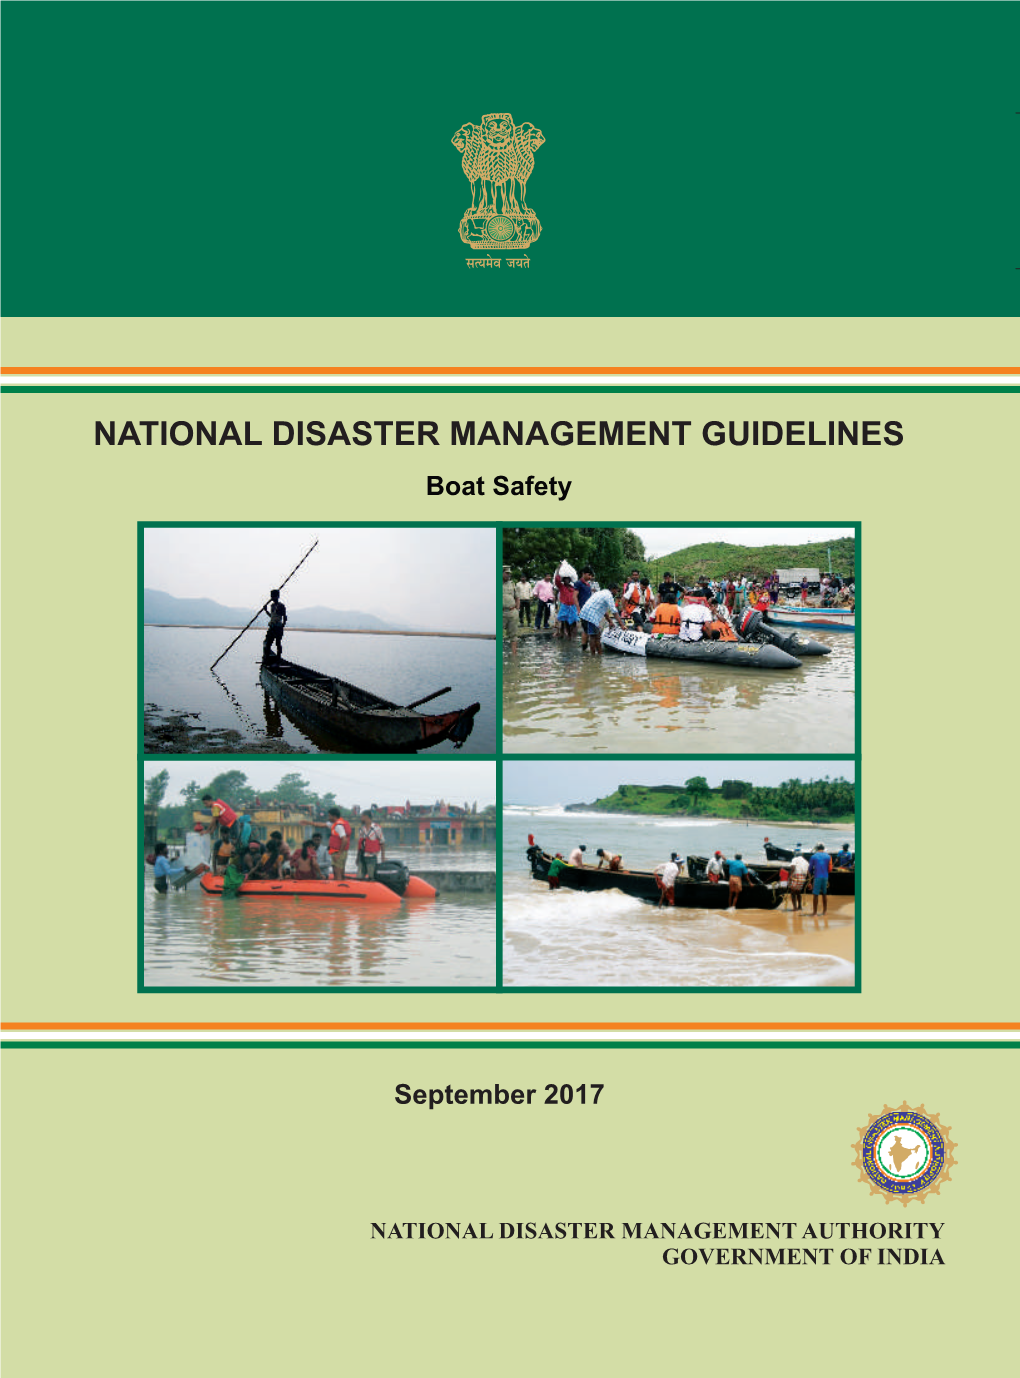 Guidelines on Boat Safety